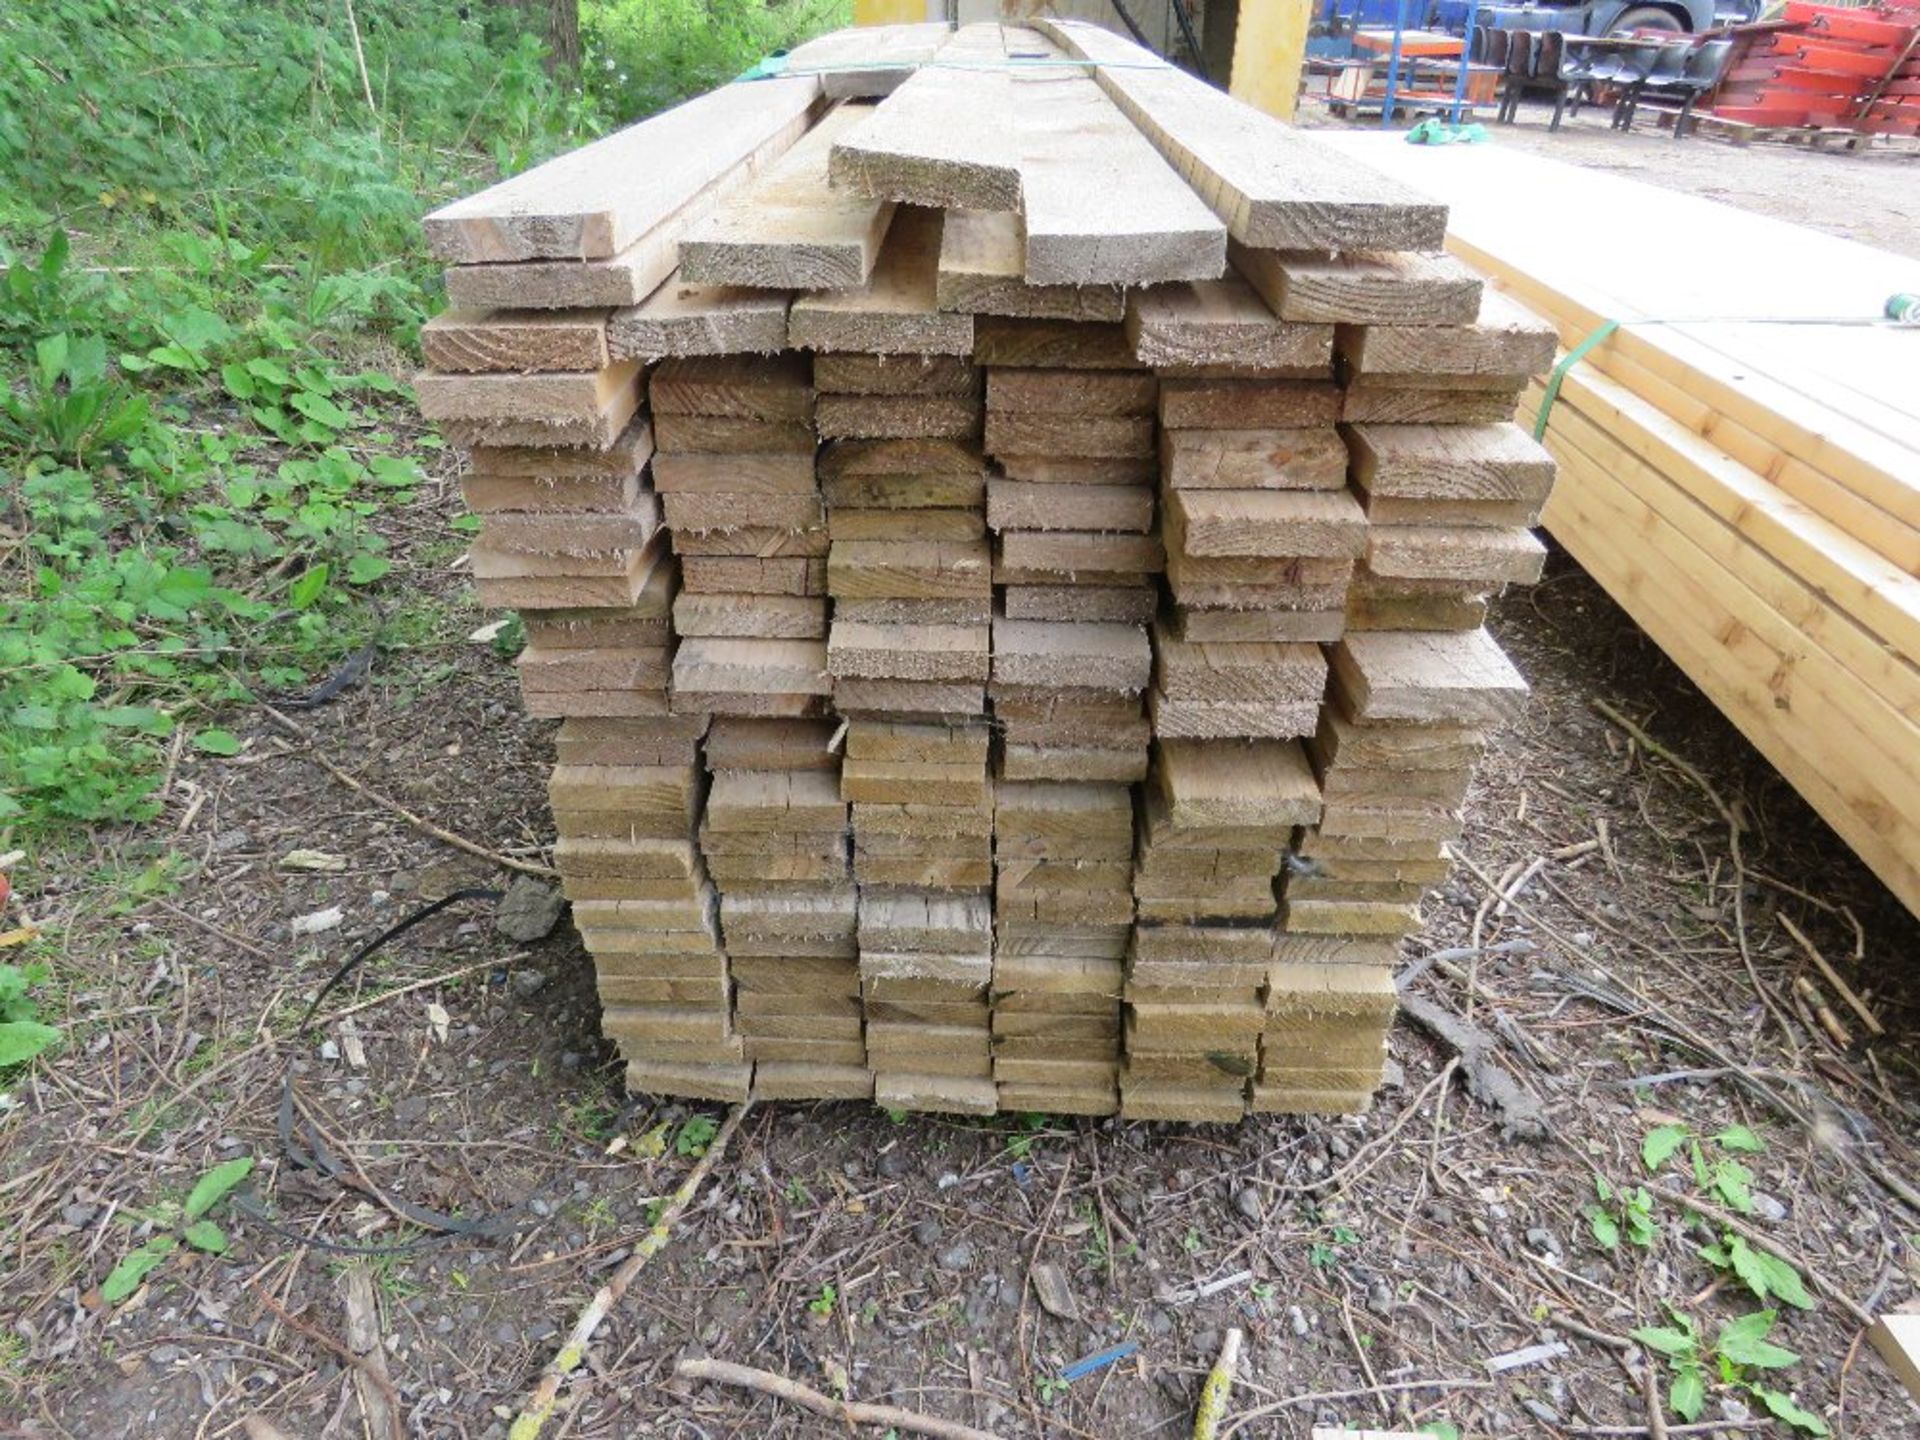 BUNDLE OF 4 X 1 TIMBER, 165PCS @ 4.8M LENGTH APPROX..NO VAT ON HAMMER PRICE - Image 5 of 5